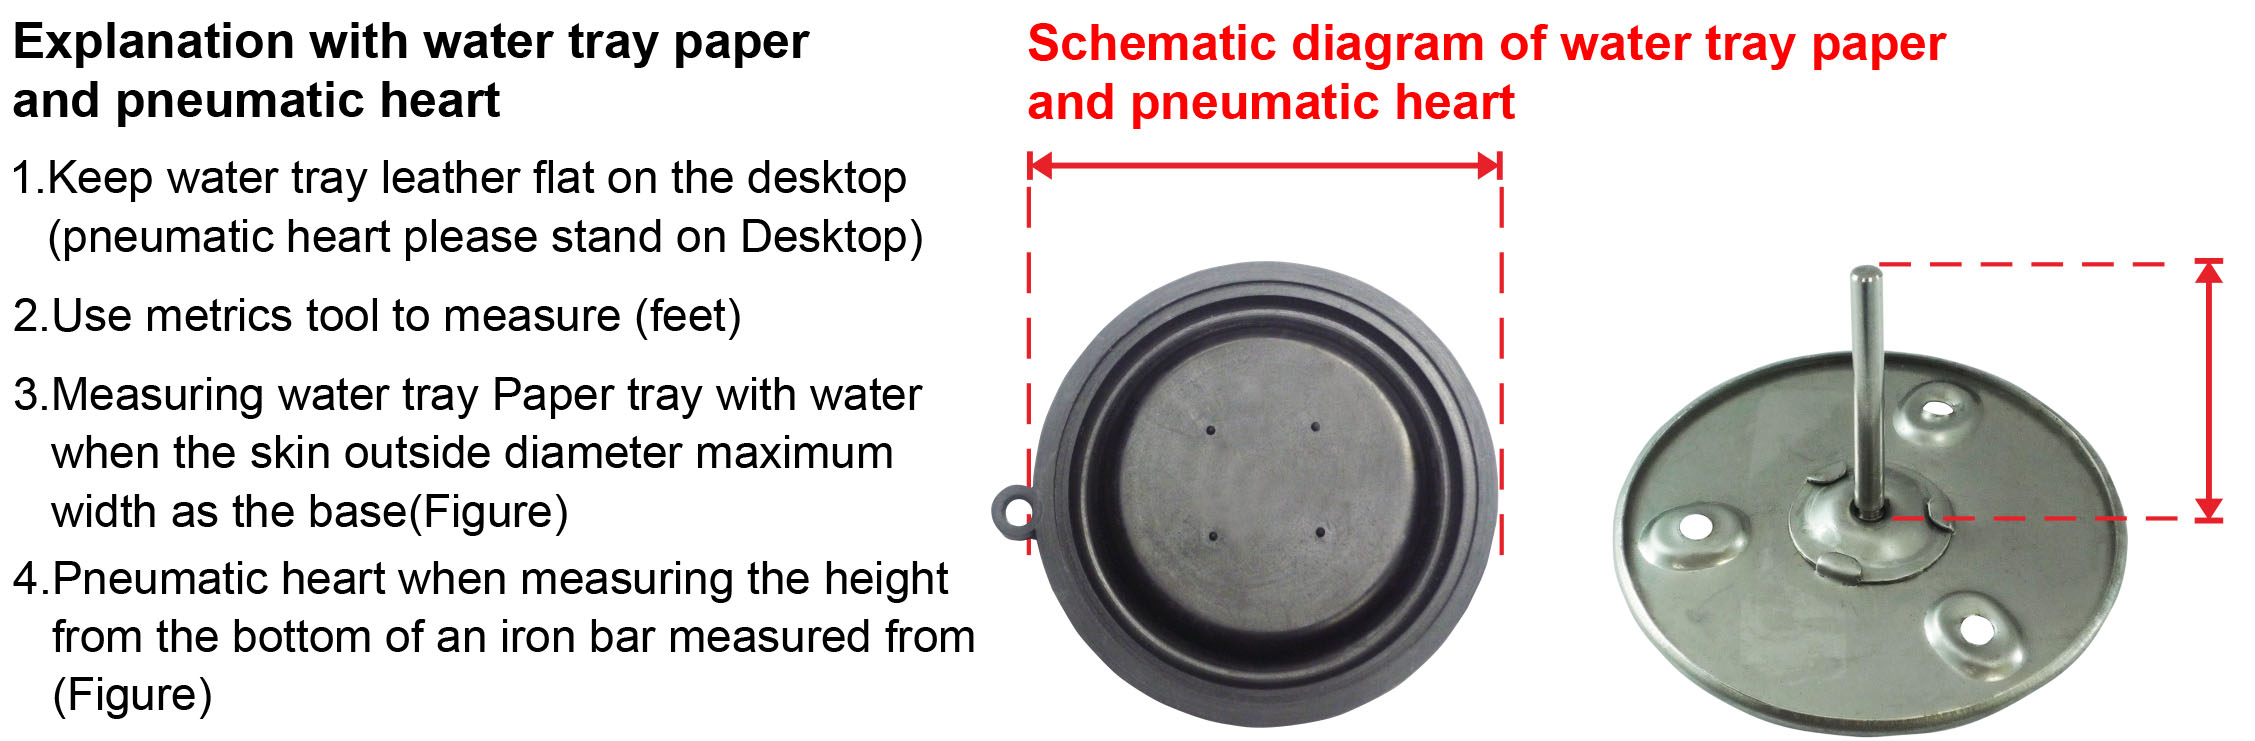 Water tray with pneumatic heart - stainless steel